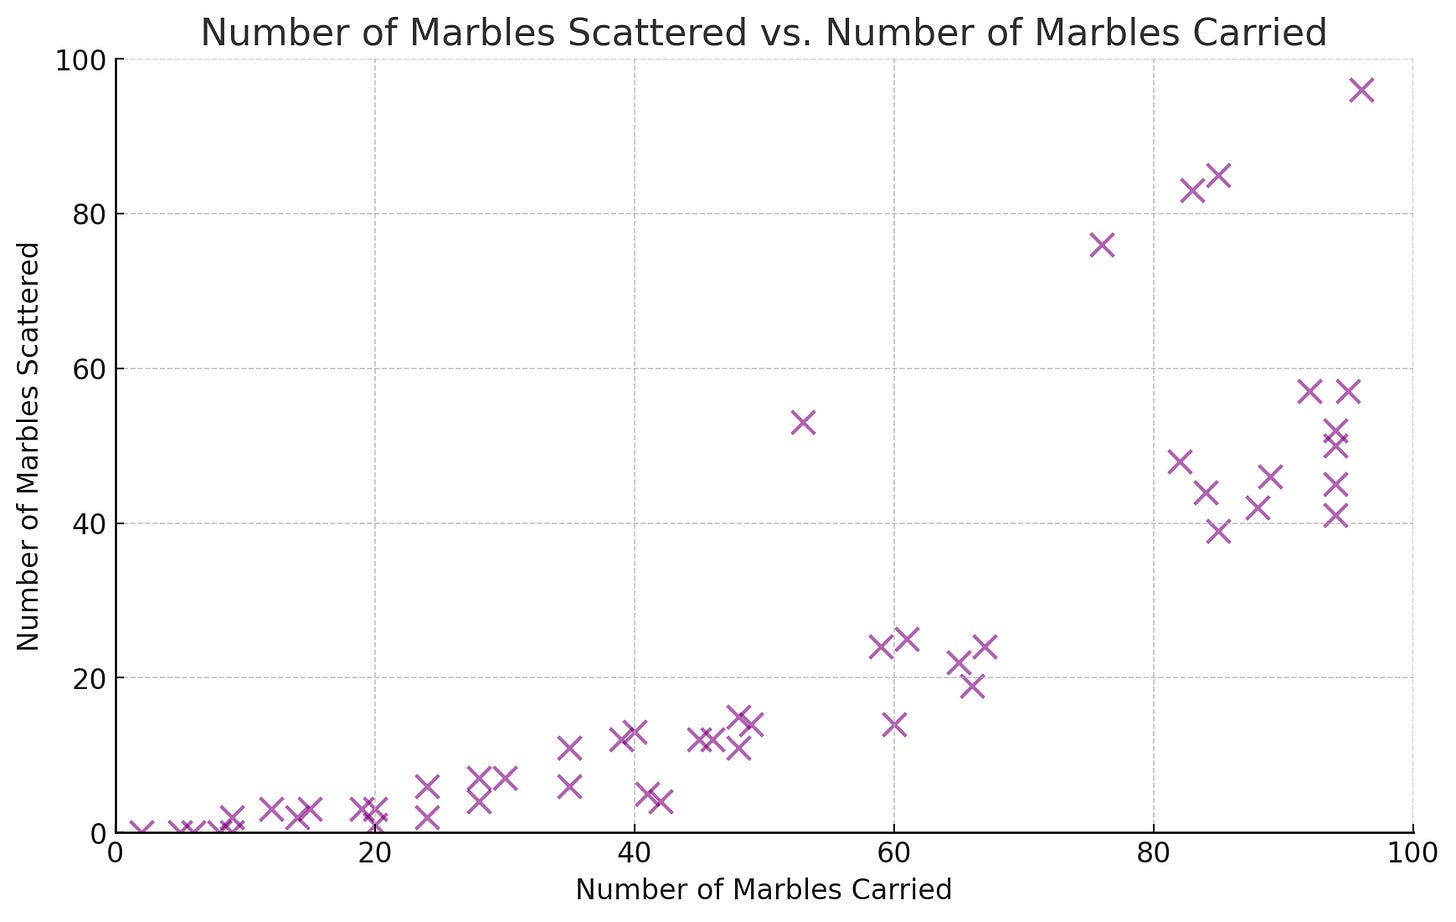 Scatter plot in ChatGPT of marbles carried vs marbles scattered